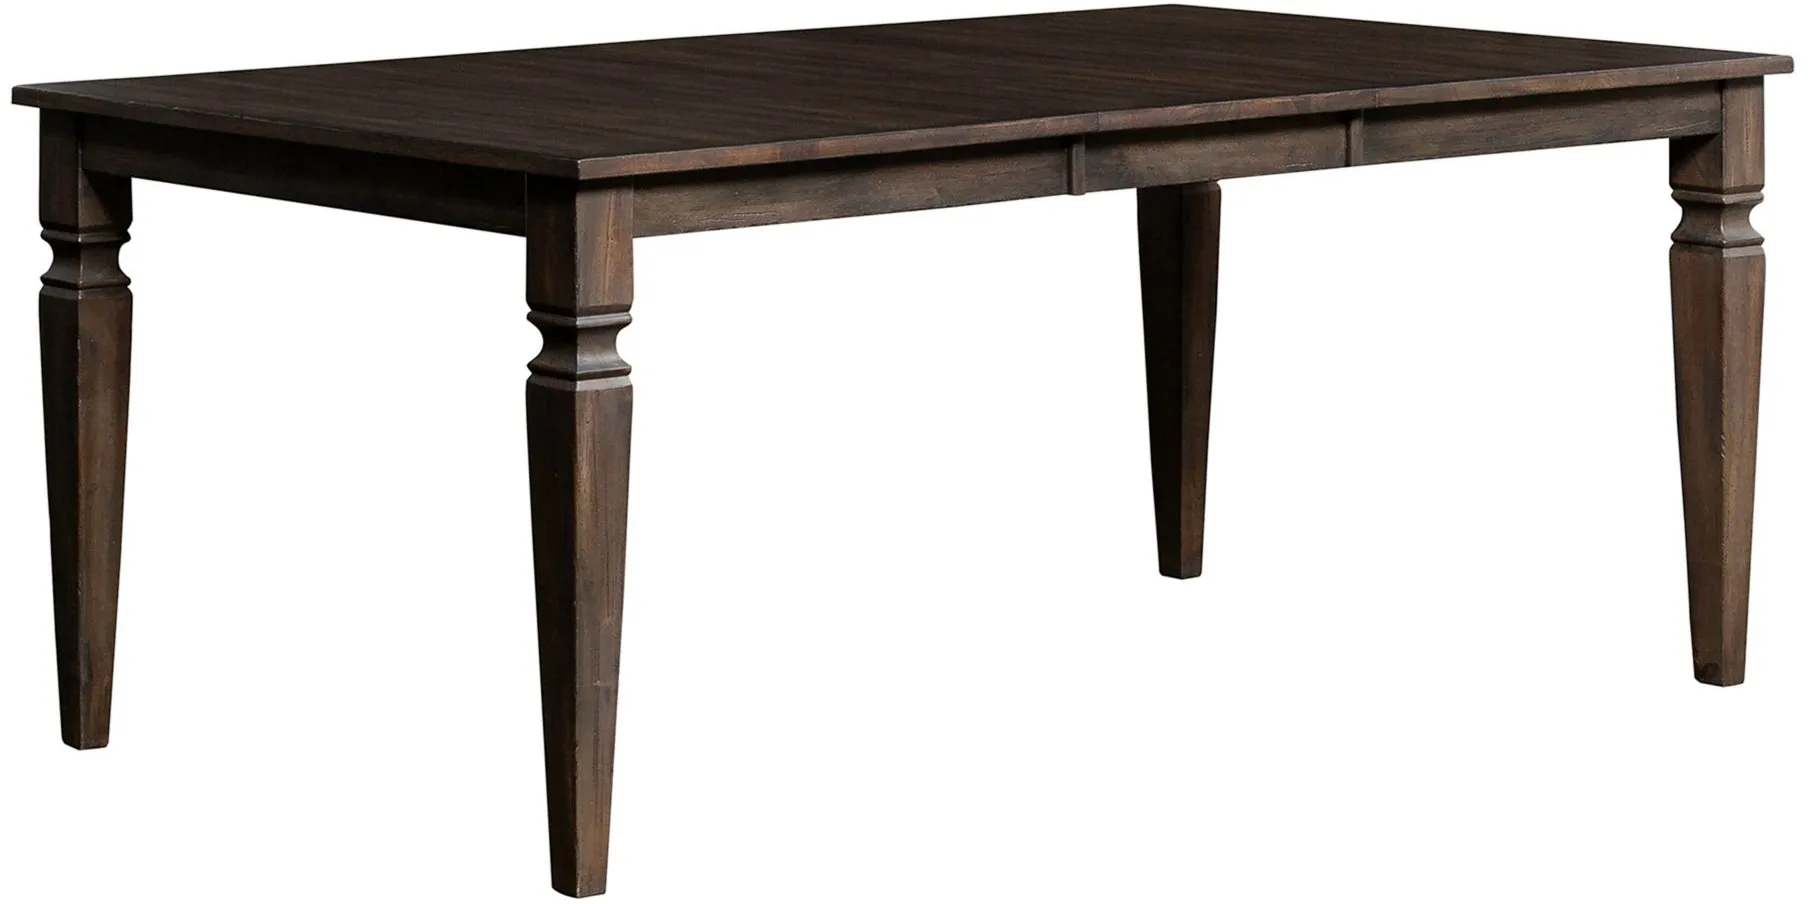 A-America Kingston Rectangular Dining Table with Butterfly Leaf in Dark Gray by A-America